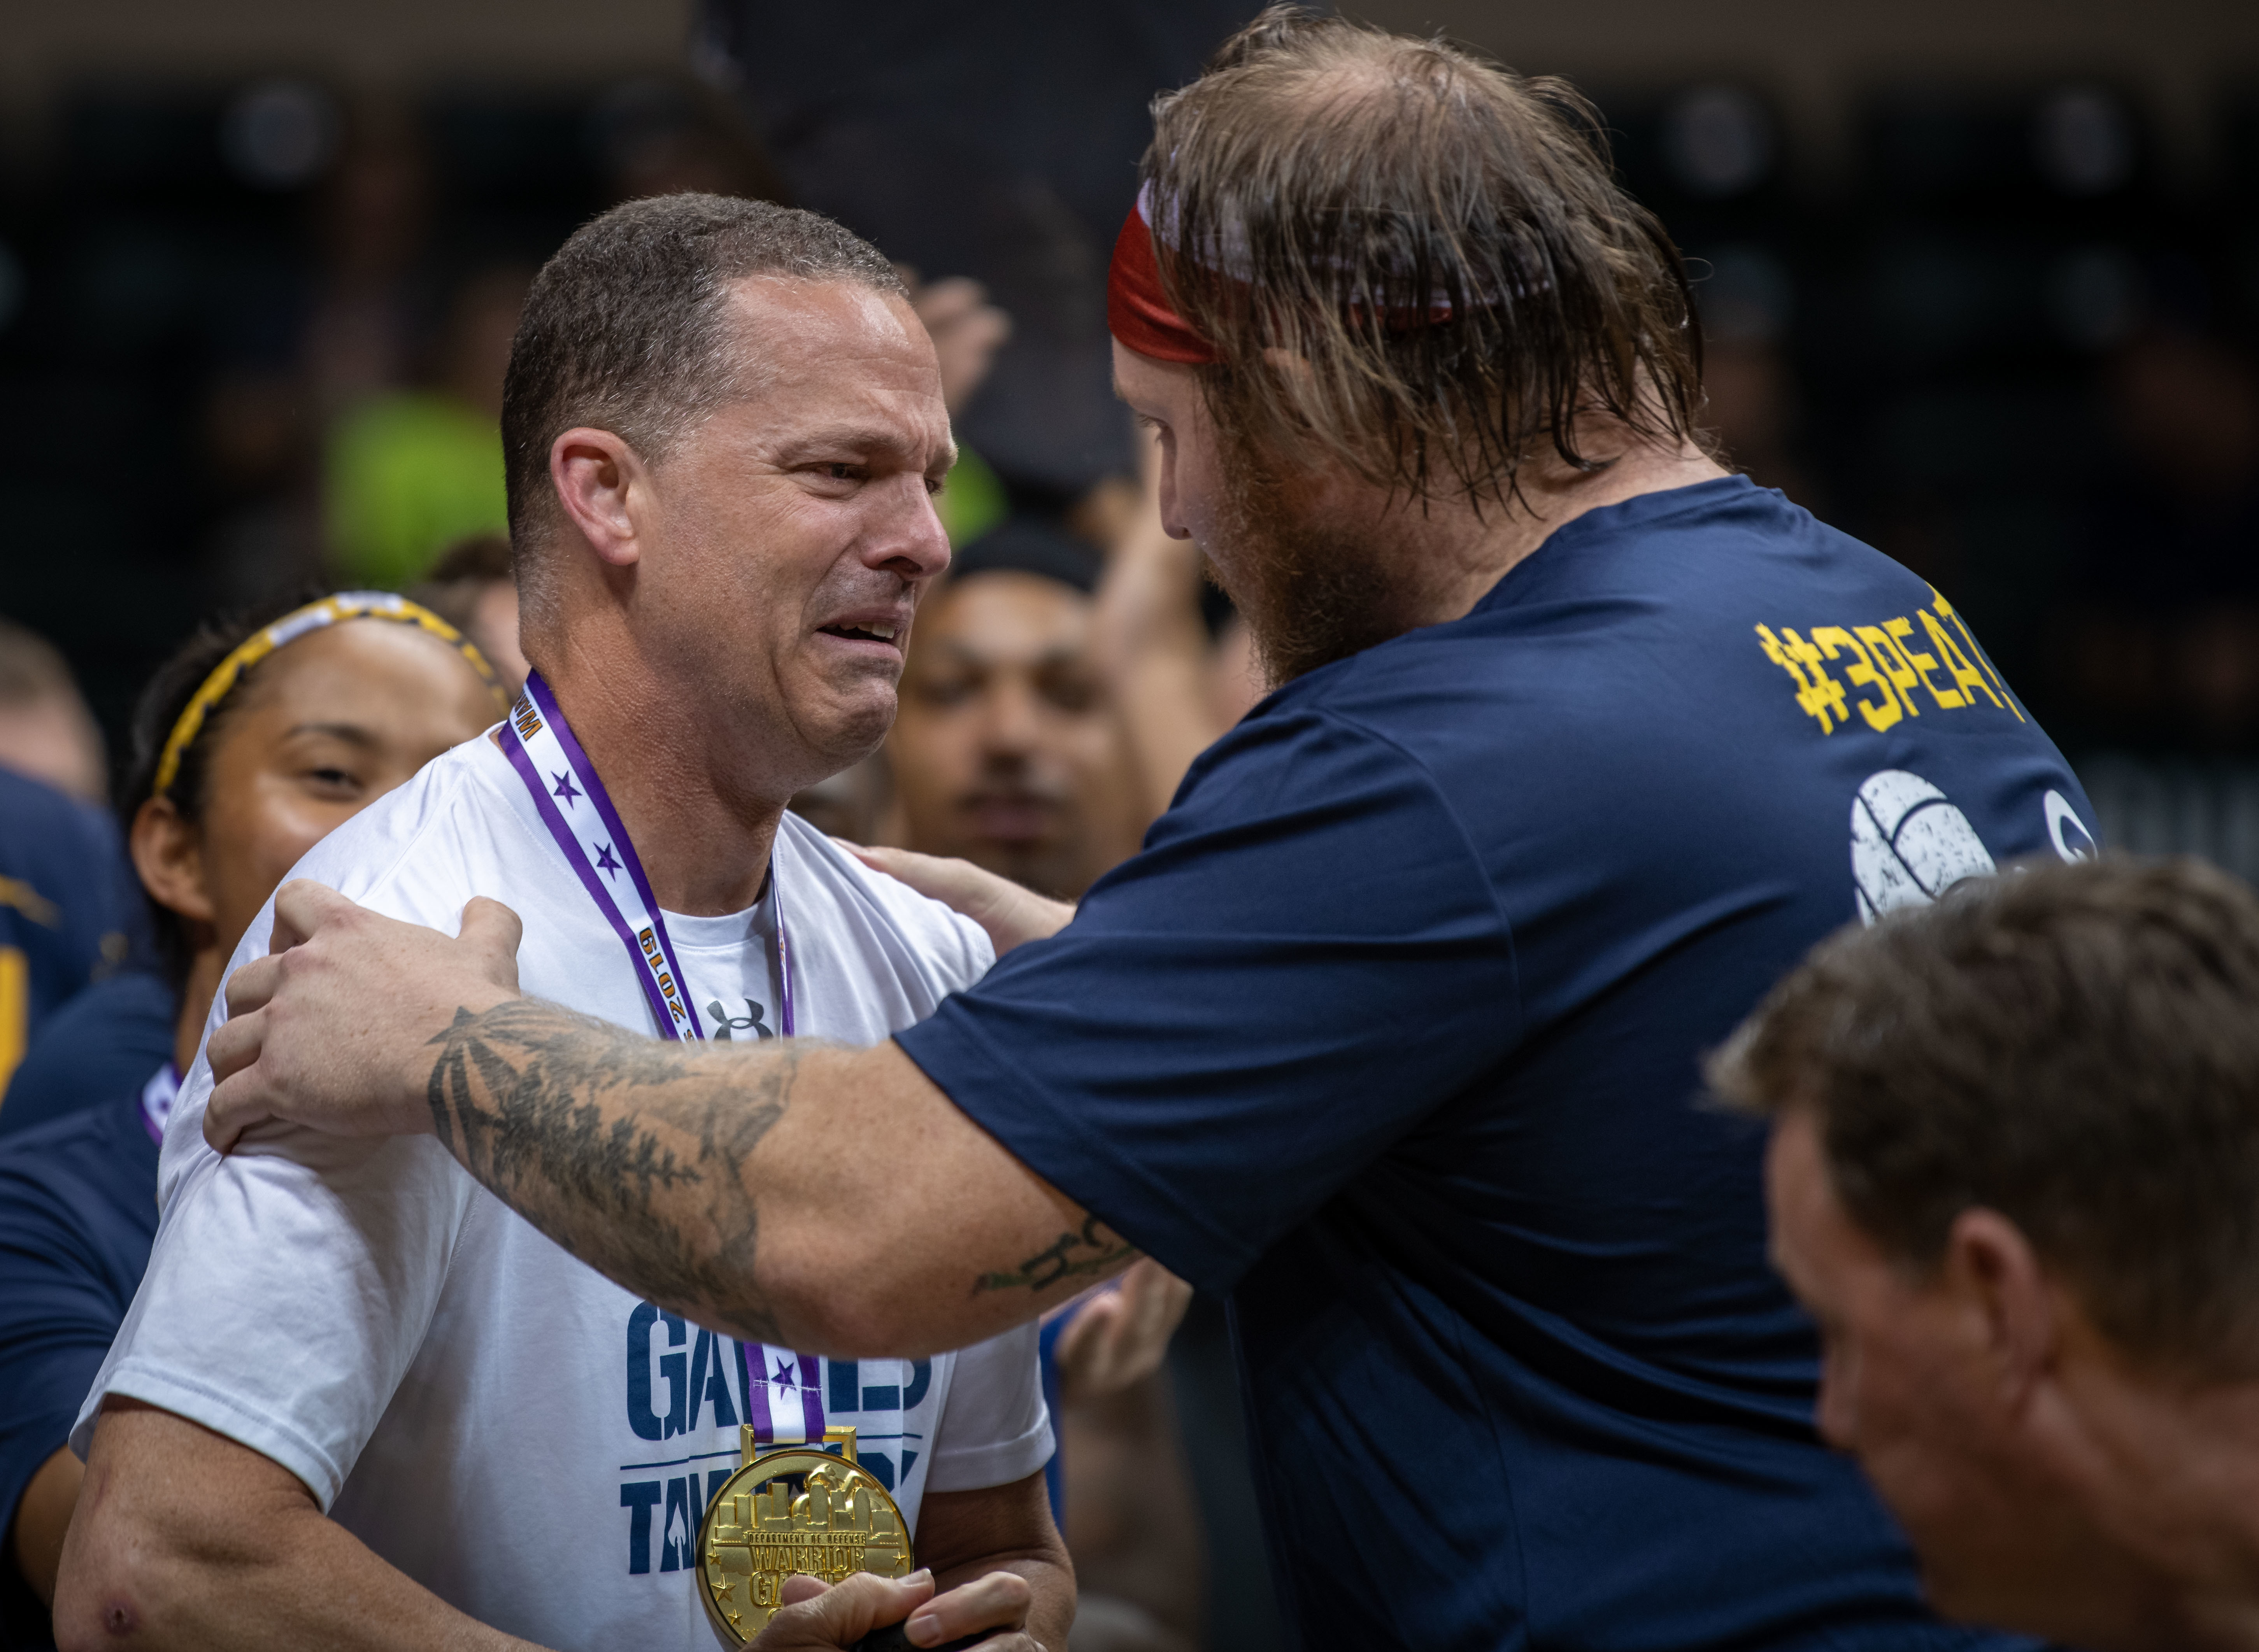 Navy Petty Officer 1st Class Tyson Schmidt, right, gives Navy Capt. Daryl Schaffer, left, his gold medal for sitting volleyball during the 2019 DoD Warrior Games at Yuengling Center in Tampa, Florida